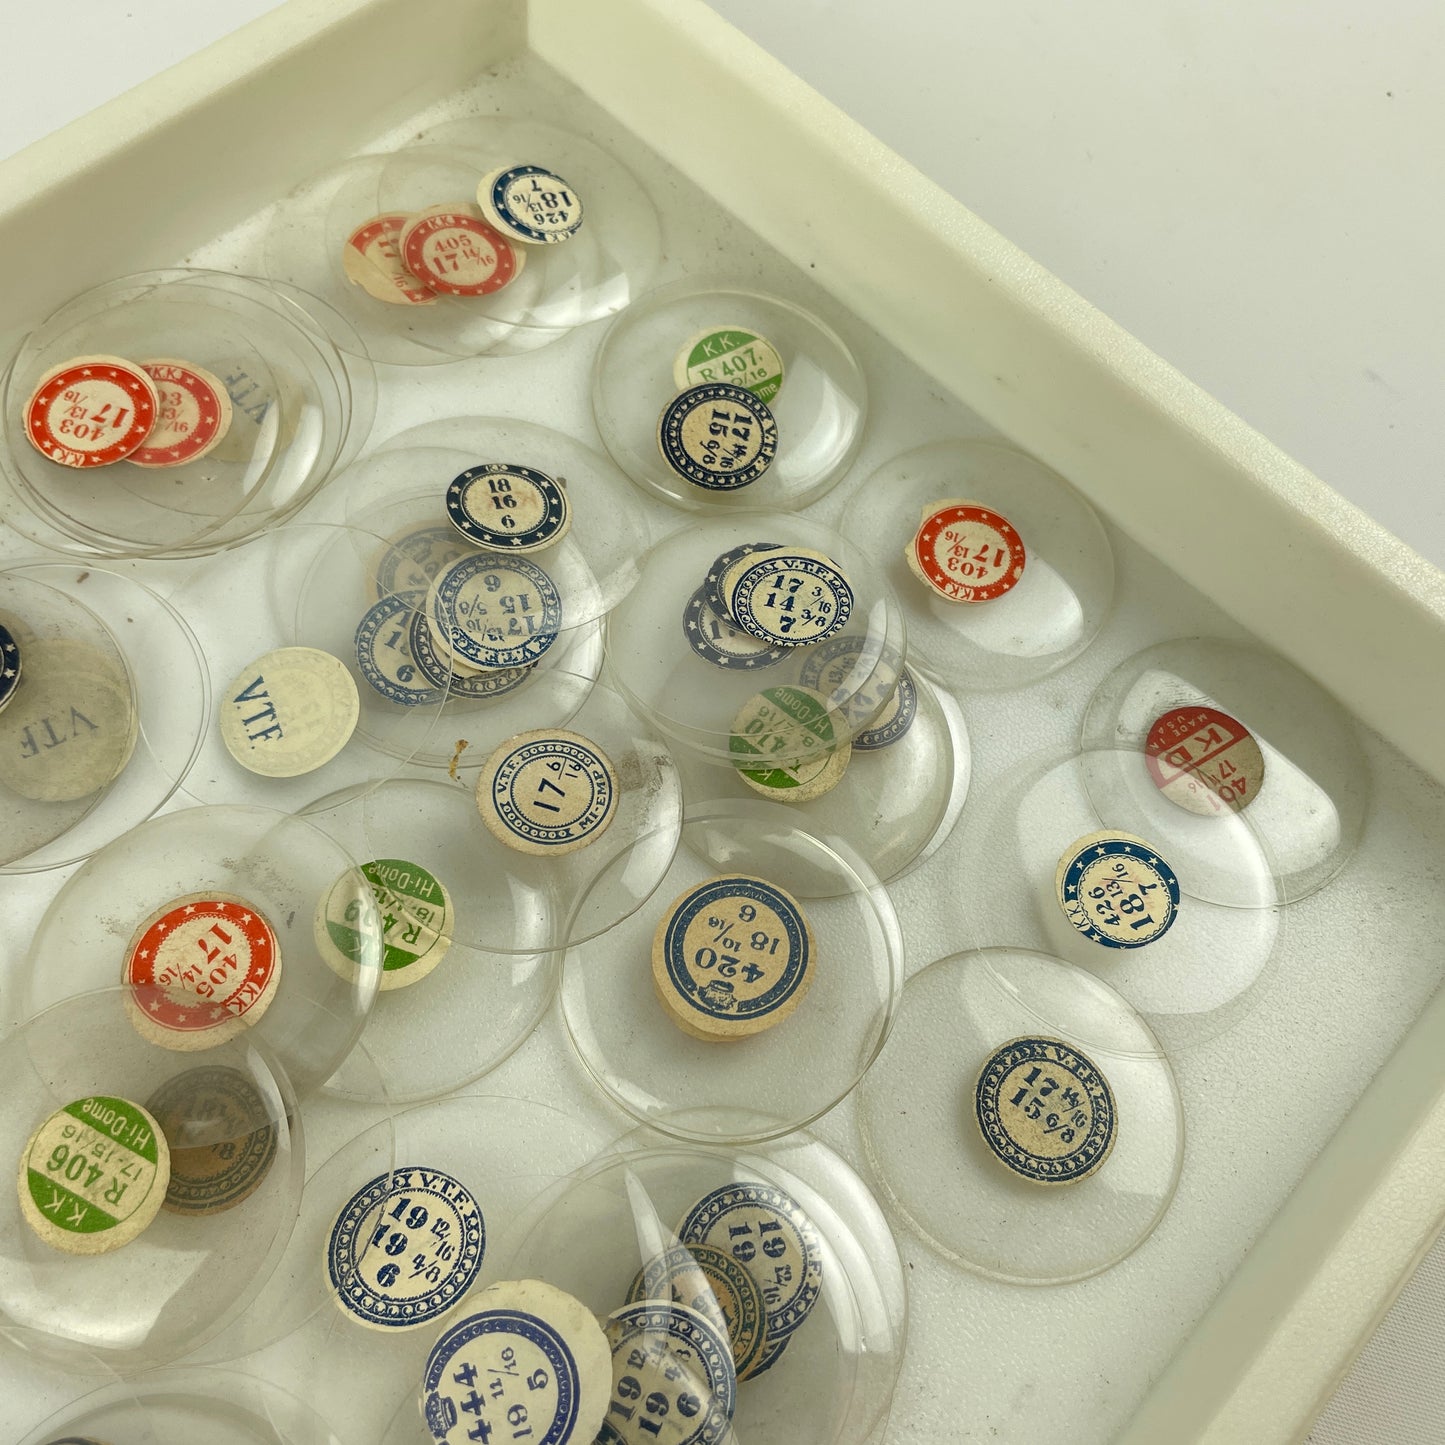 Mar Lot 21- Watchmaker’s Selection of Glass NOS Pocket Watch Crystals 100